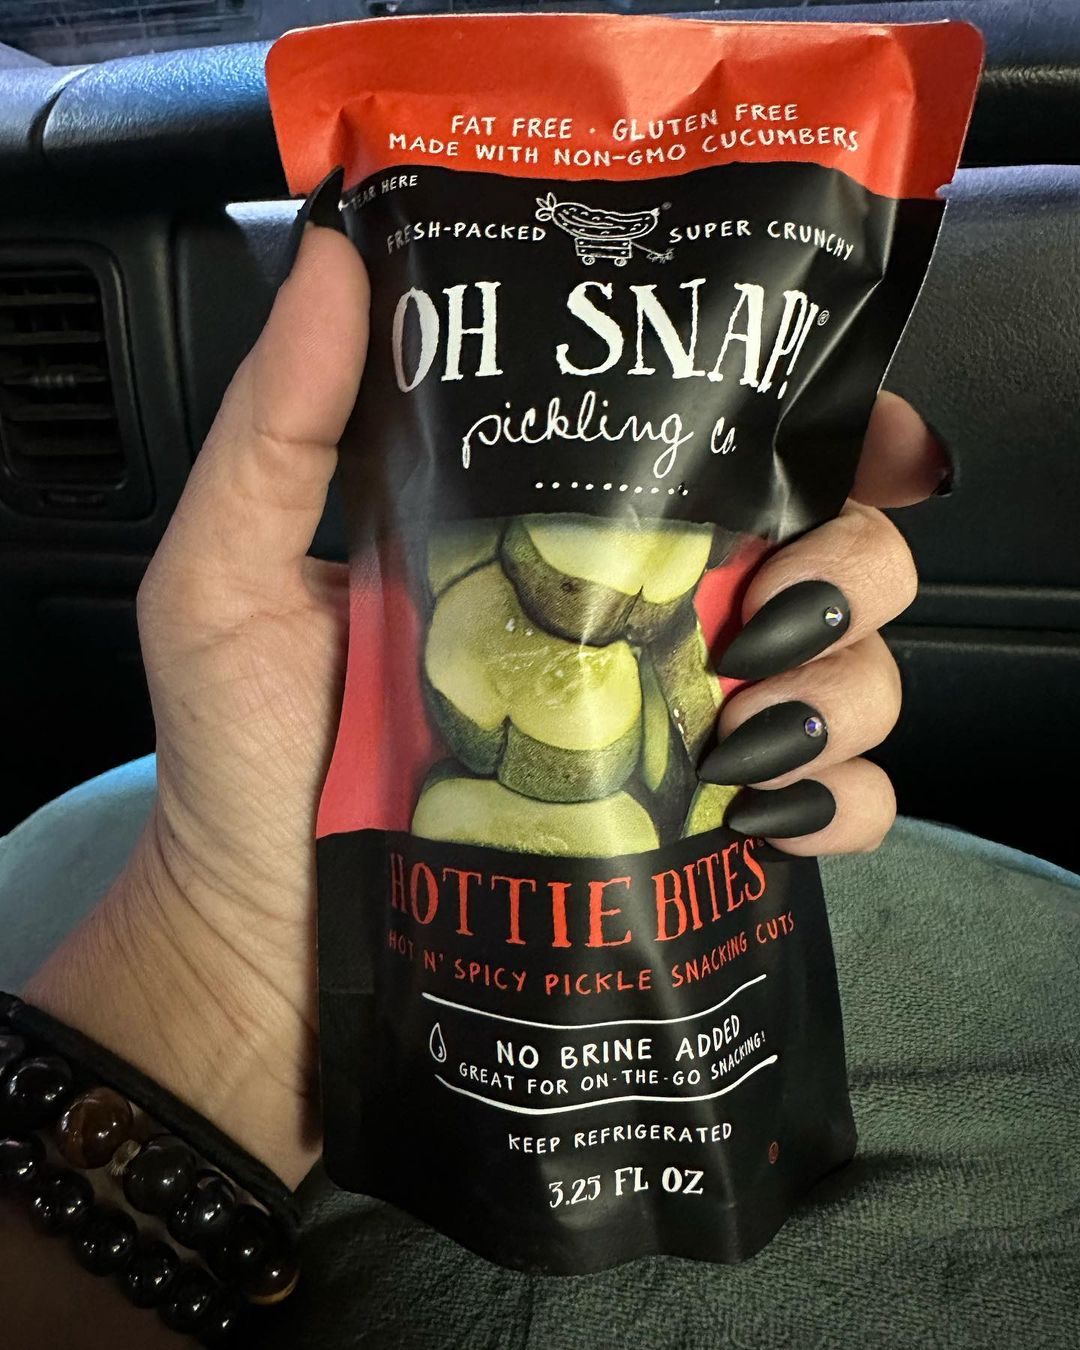 Person holding Oh Snap! pickles pack